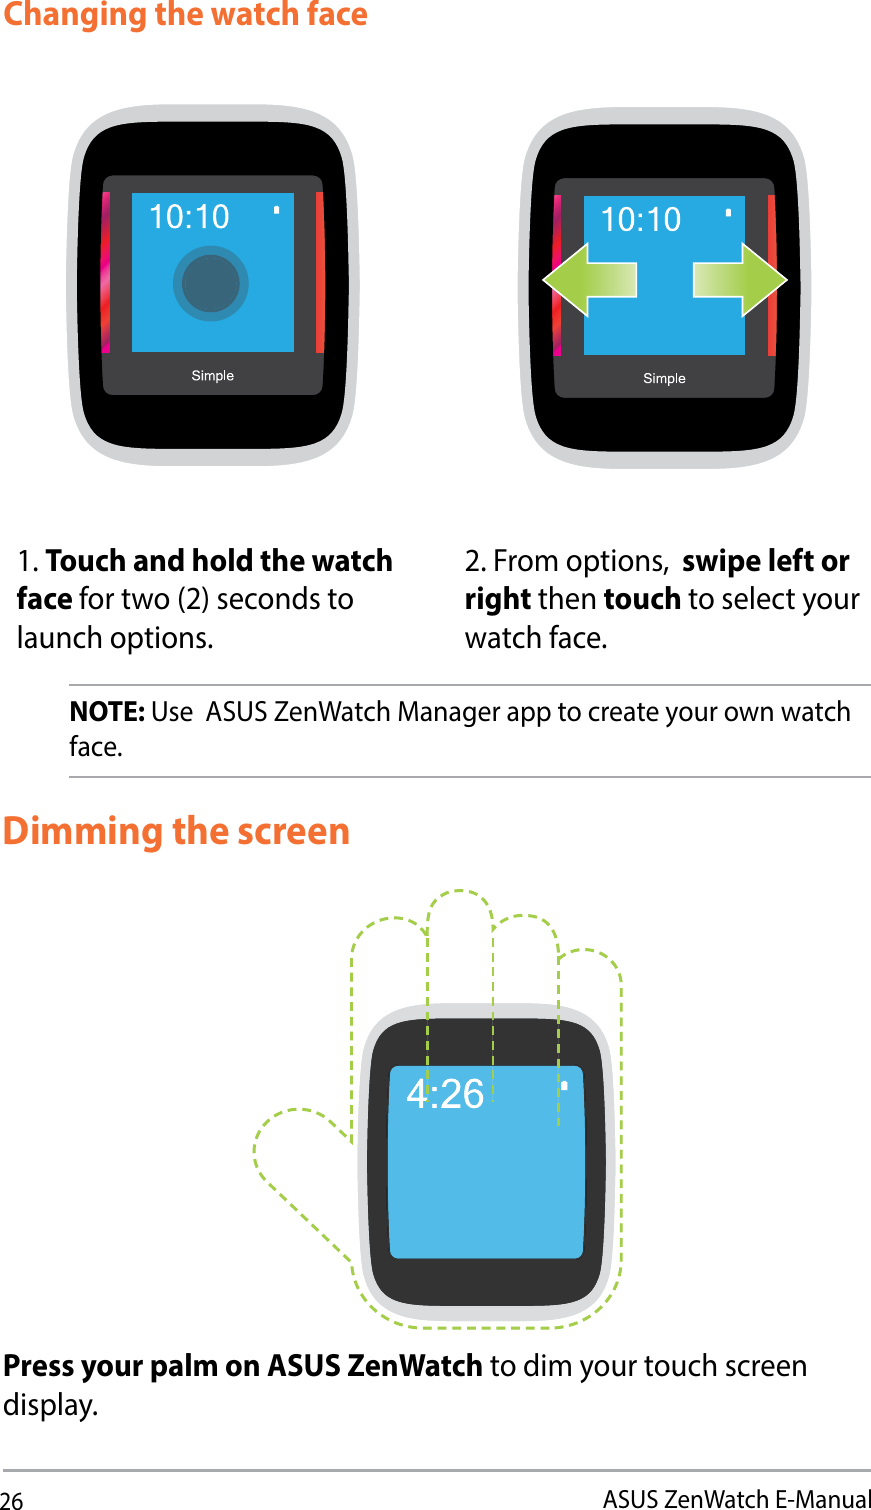 26ASUS ZenWatch E-ManualChanging the watch faceNOTE: Use  ASUS ZenWatch Manager app to create your own watch face. 1. Touch and hold the watch face for two (2) seconds to launch options. 2. From options,  swipe left or right then touch to select your watch face.Dimming the screenPress your palm on ASUS ZenWatch to dim your touch screen display. 